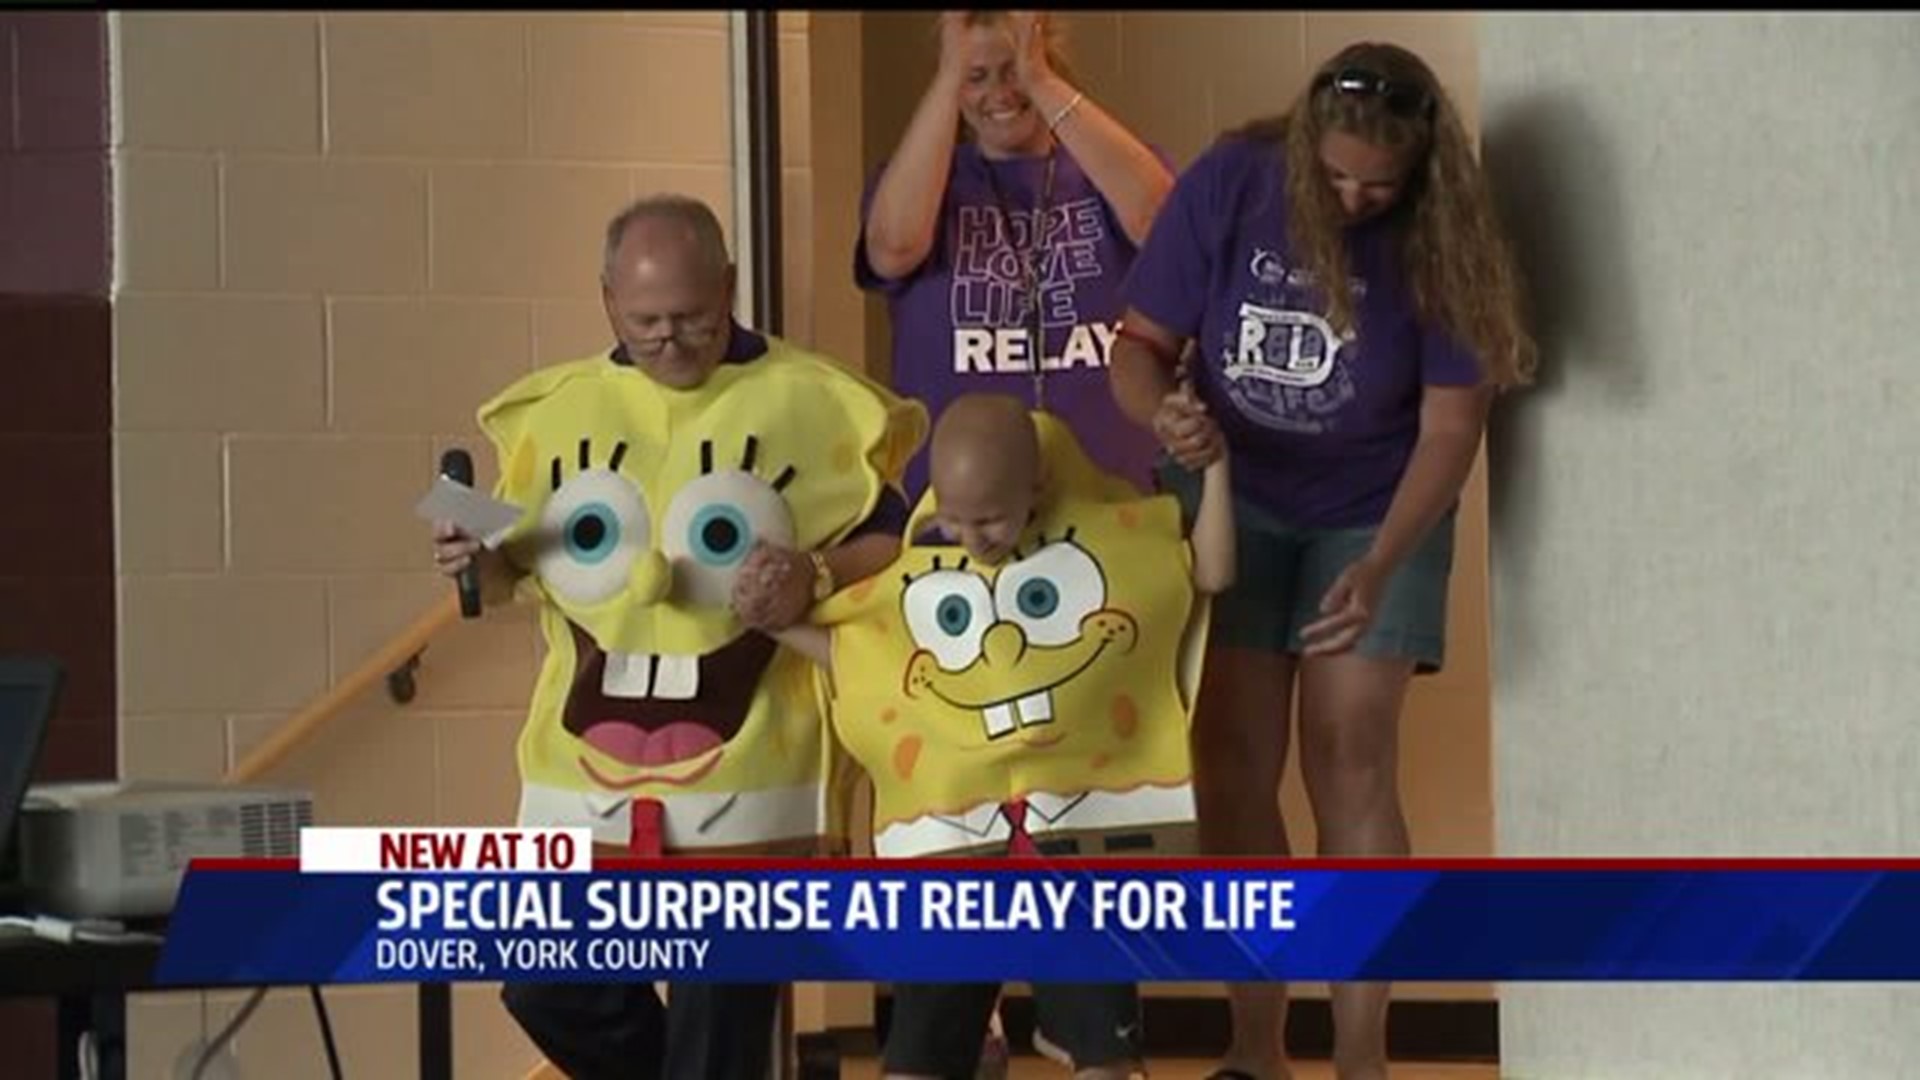 A Special surprise at Relay for Life